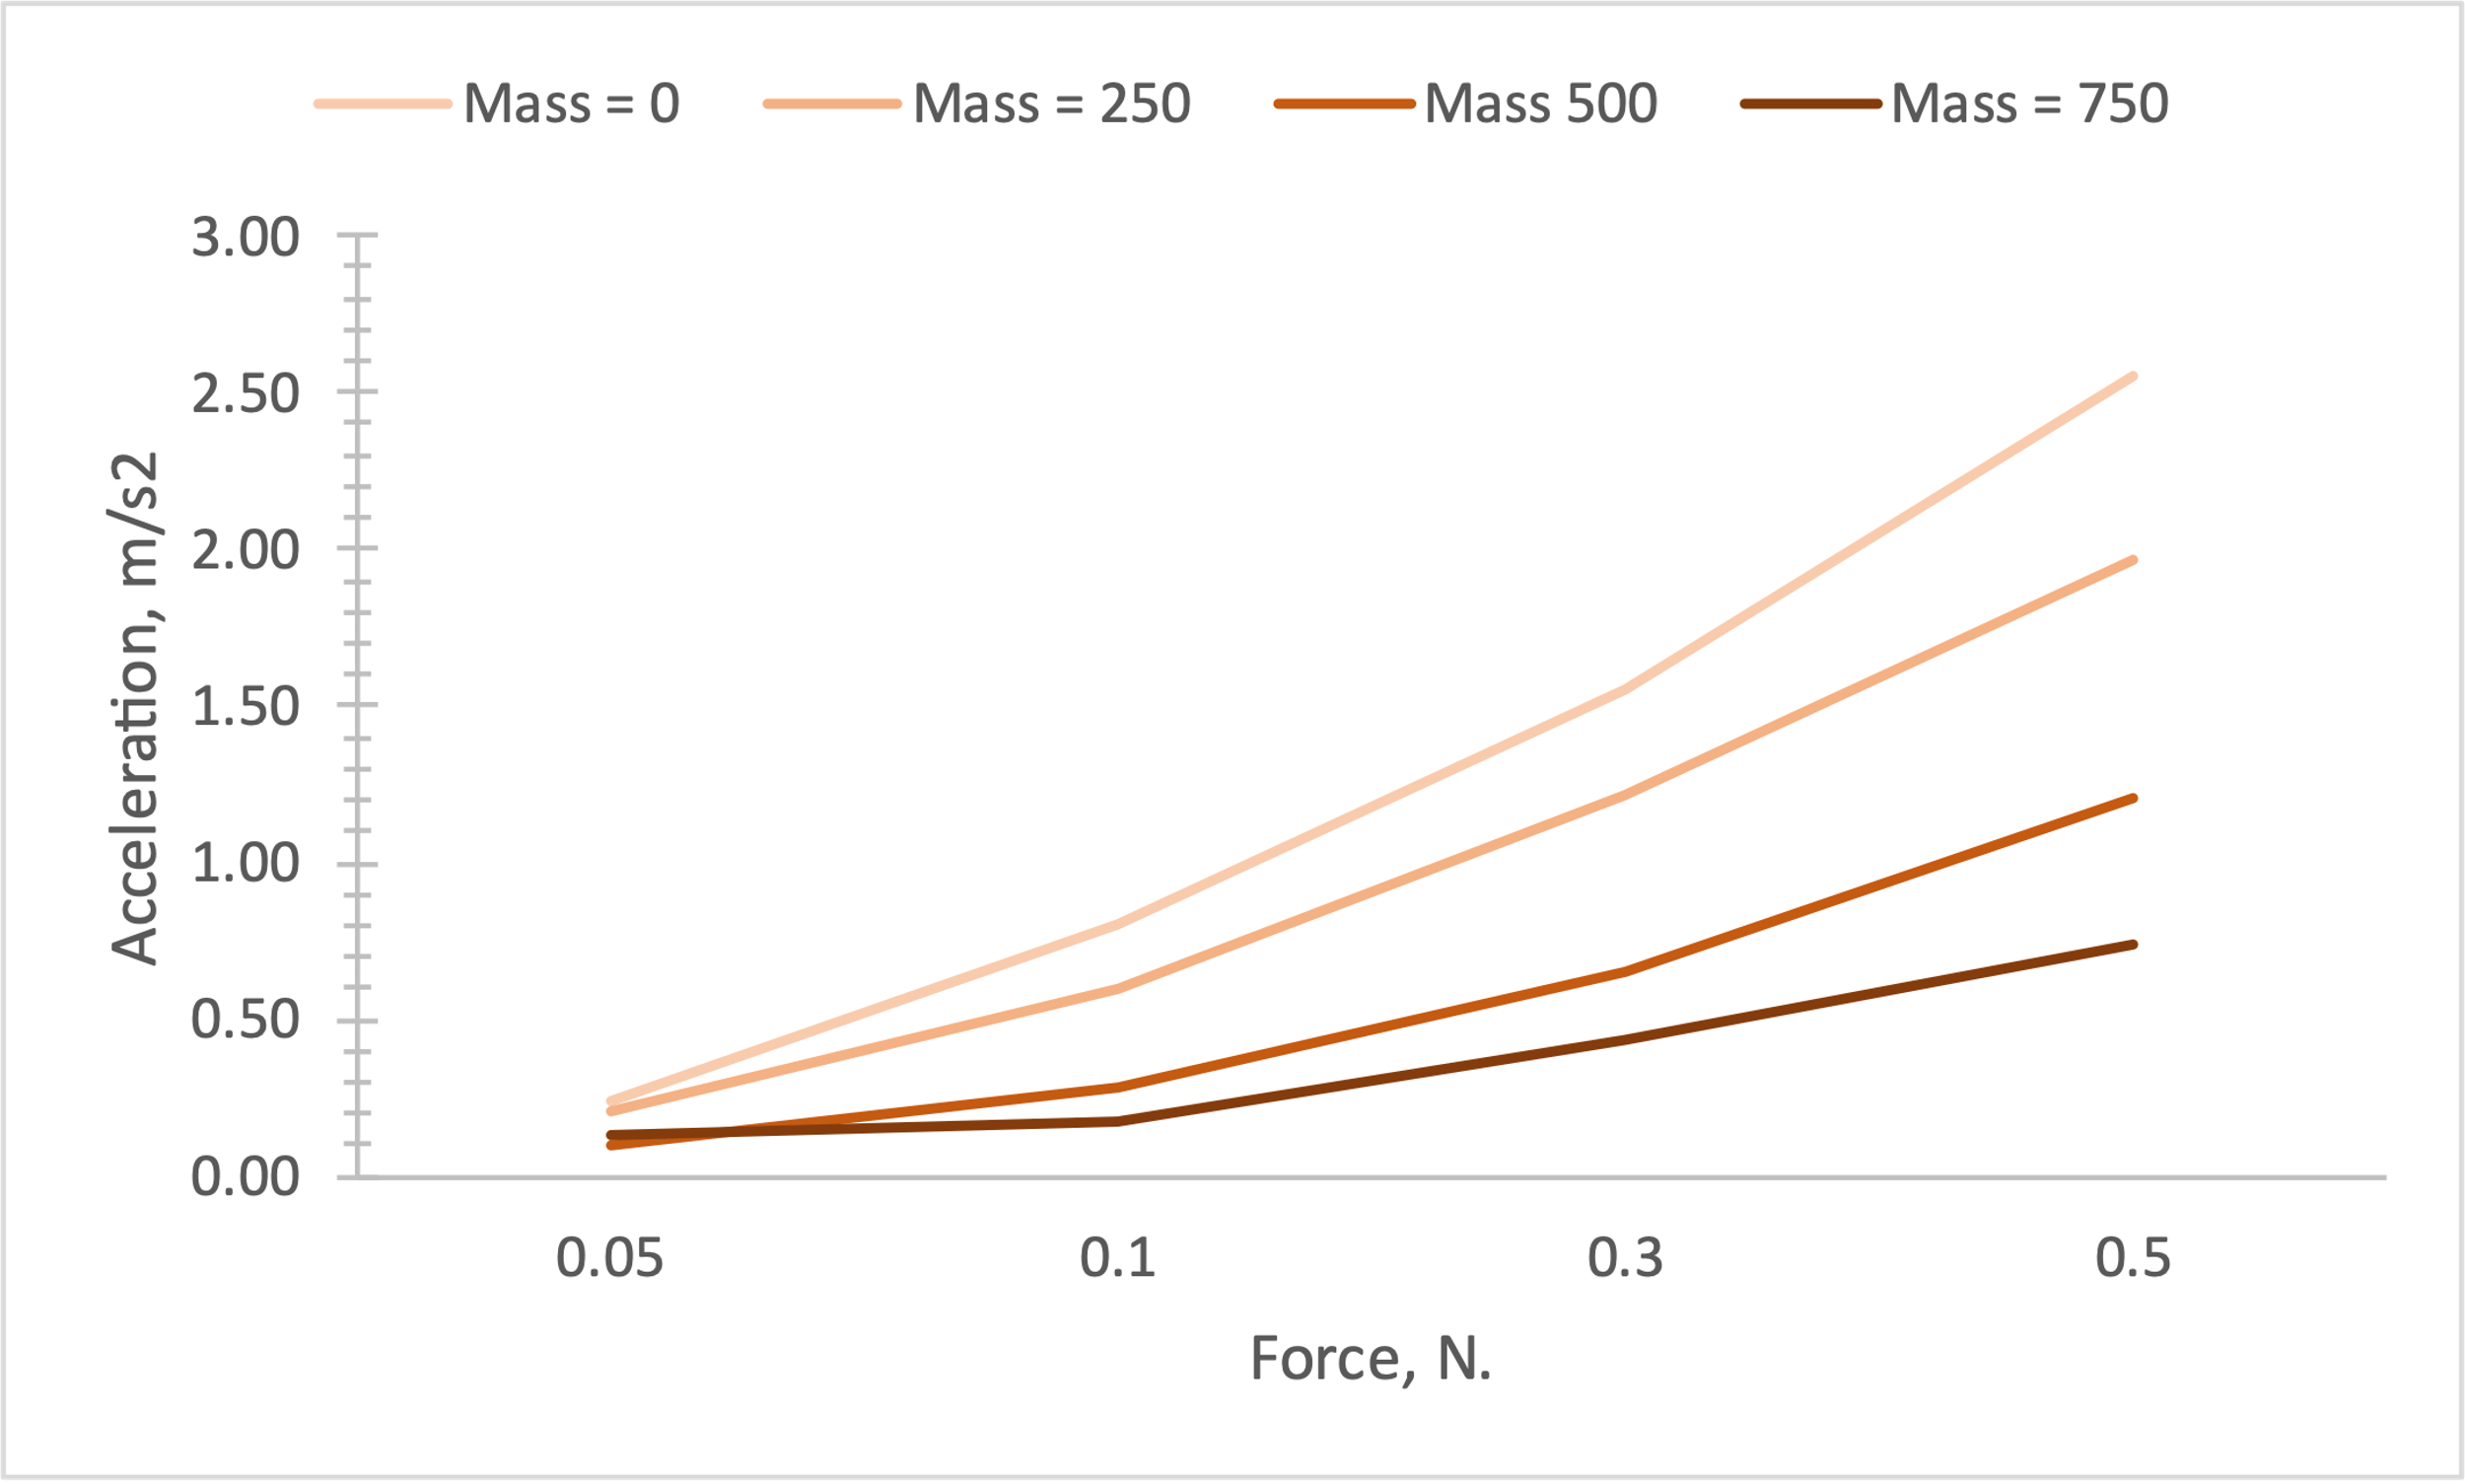 Graph of acceleration versus force and mass